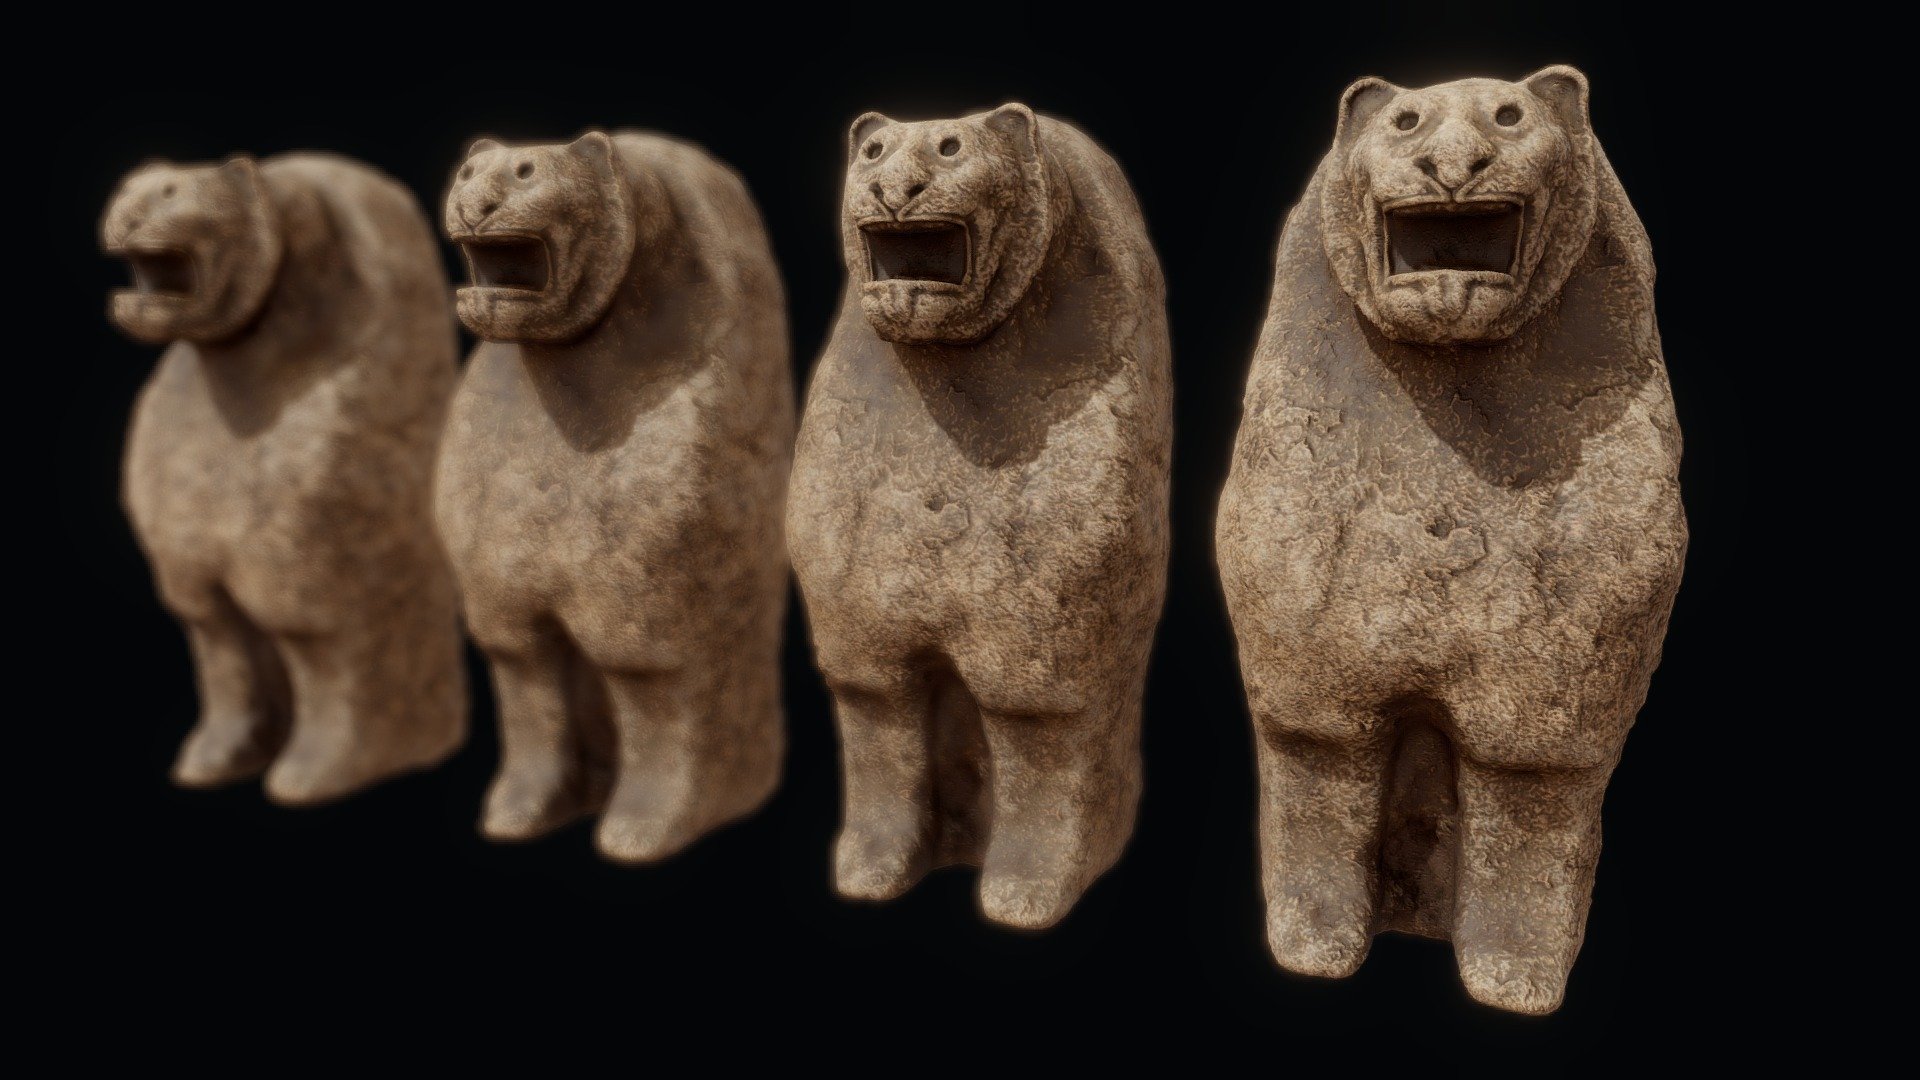 Original referance is from Lion Gate in Hattusa
- Modeled in Maya and detailed in Zbrush.
- Texture resolution is 4K
More info: 
https://www.artstation.com/infinitymodels - Hittite Lion Statue - 3D model by Infinity Models (@infinitymodels) 3d model